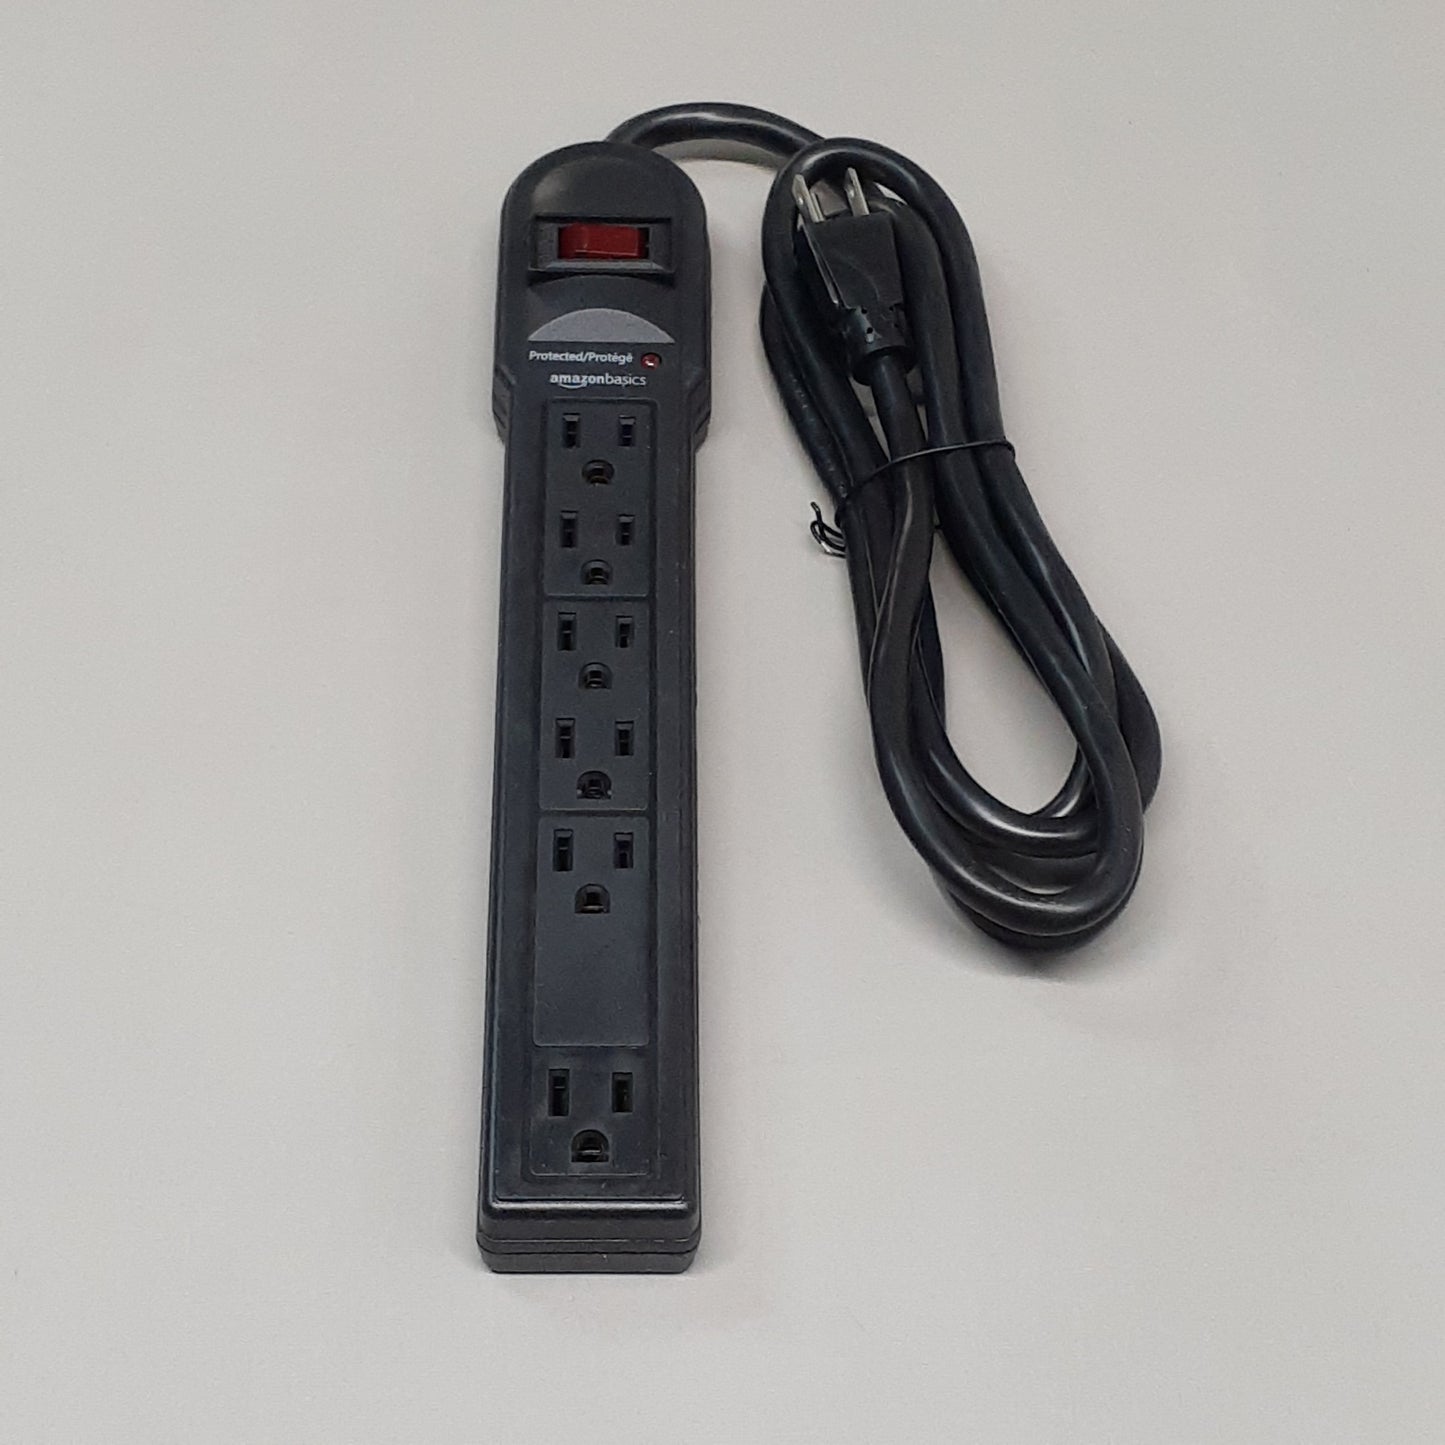 AMAZON BASICS 6-Outlet Surge Protector Power Cord Strip, 790 Joule, Black (New)